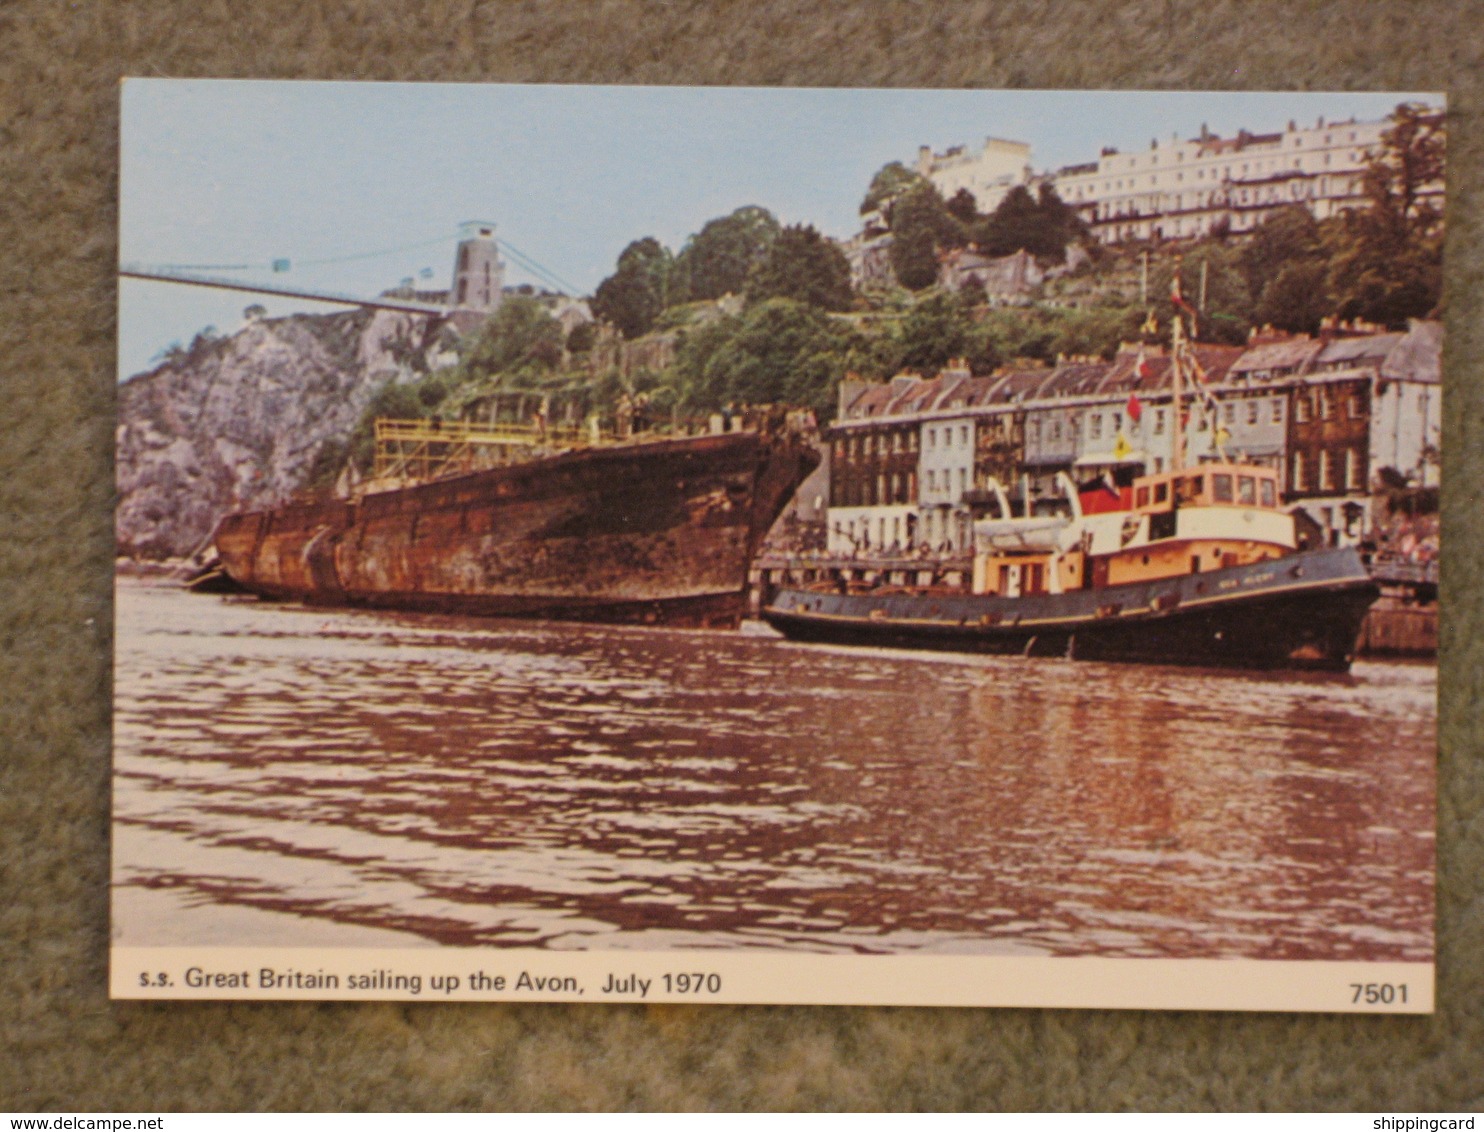 SS GREAT BRITAIN SAILING UP THE RIVER AVON 1970 - Cargos